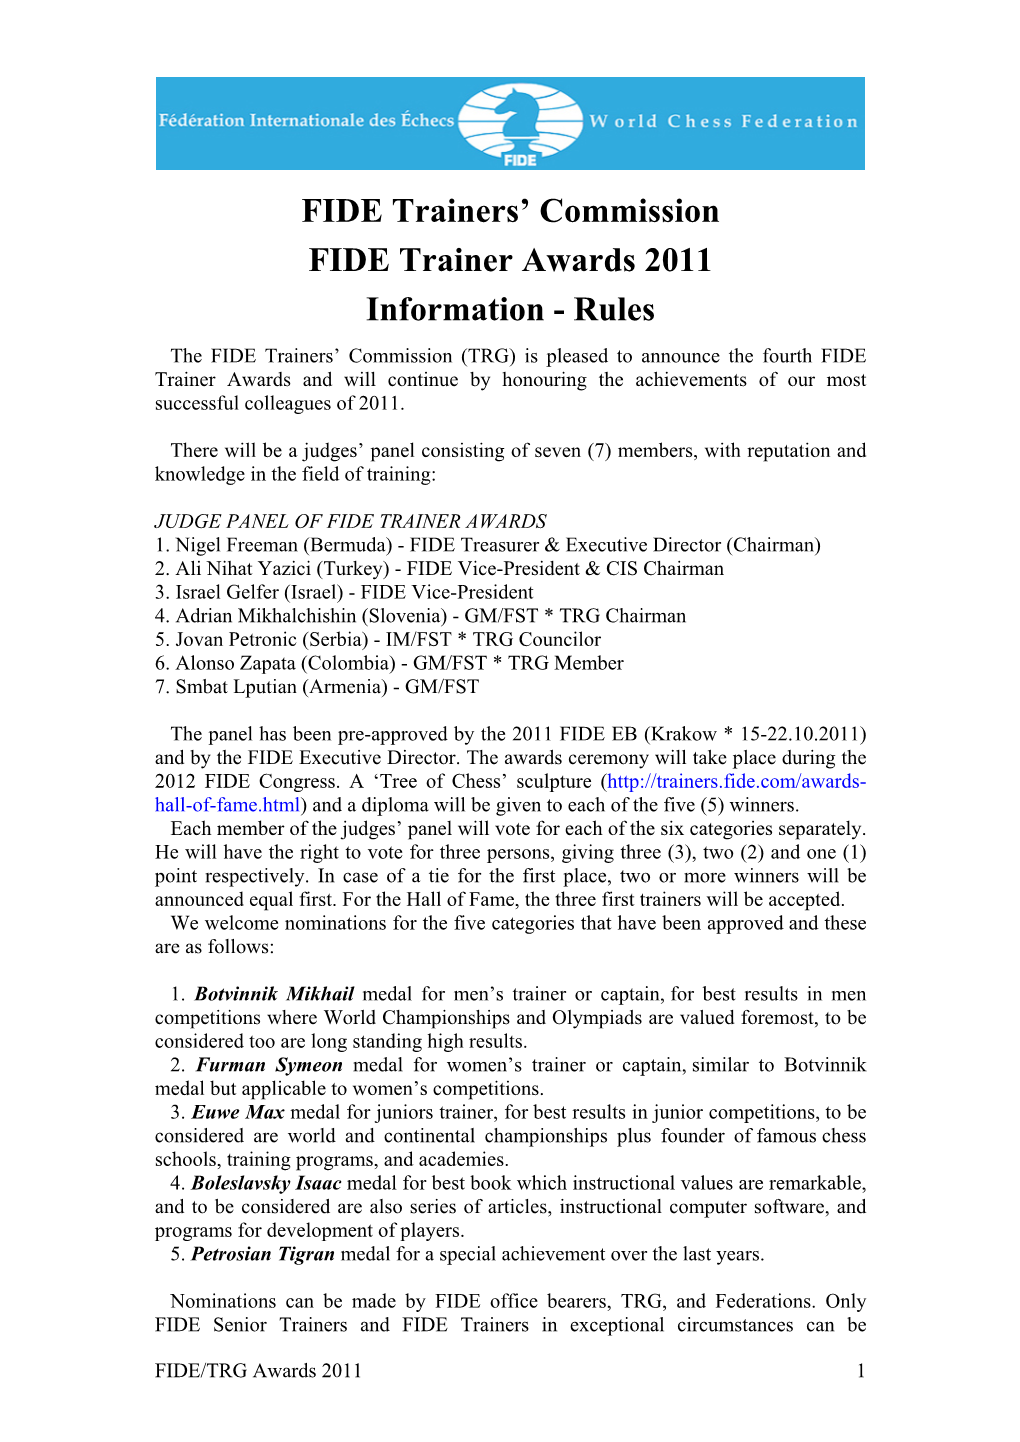 Rules for Trainers Awards 2011